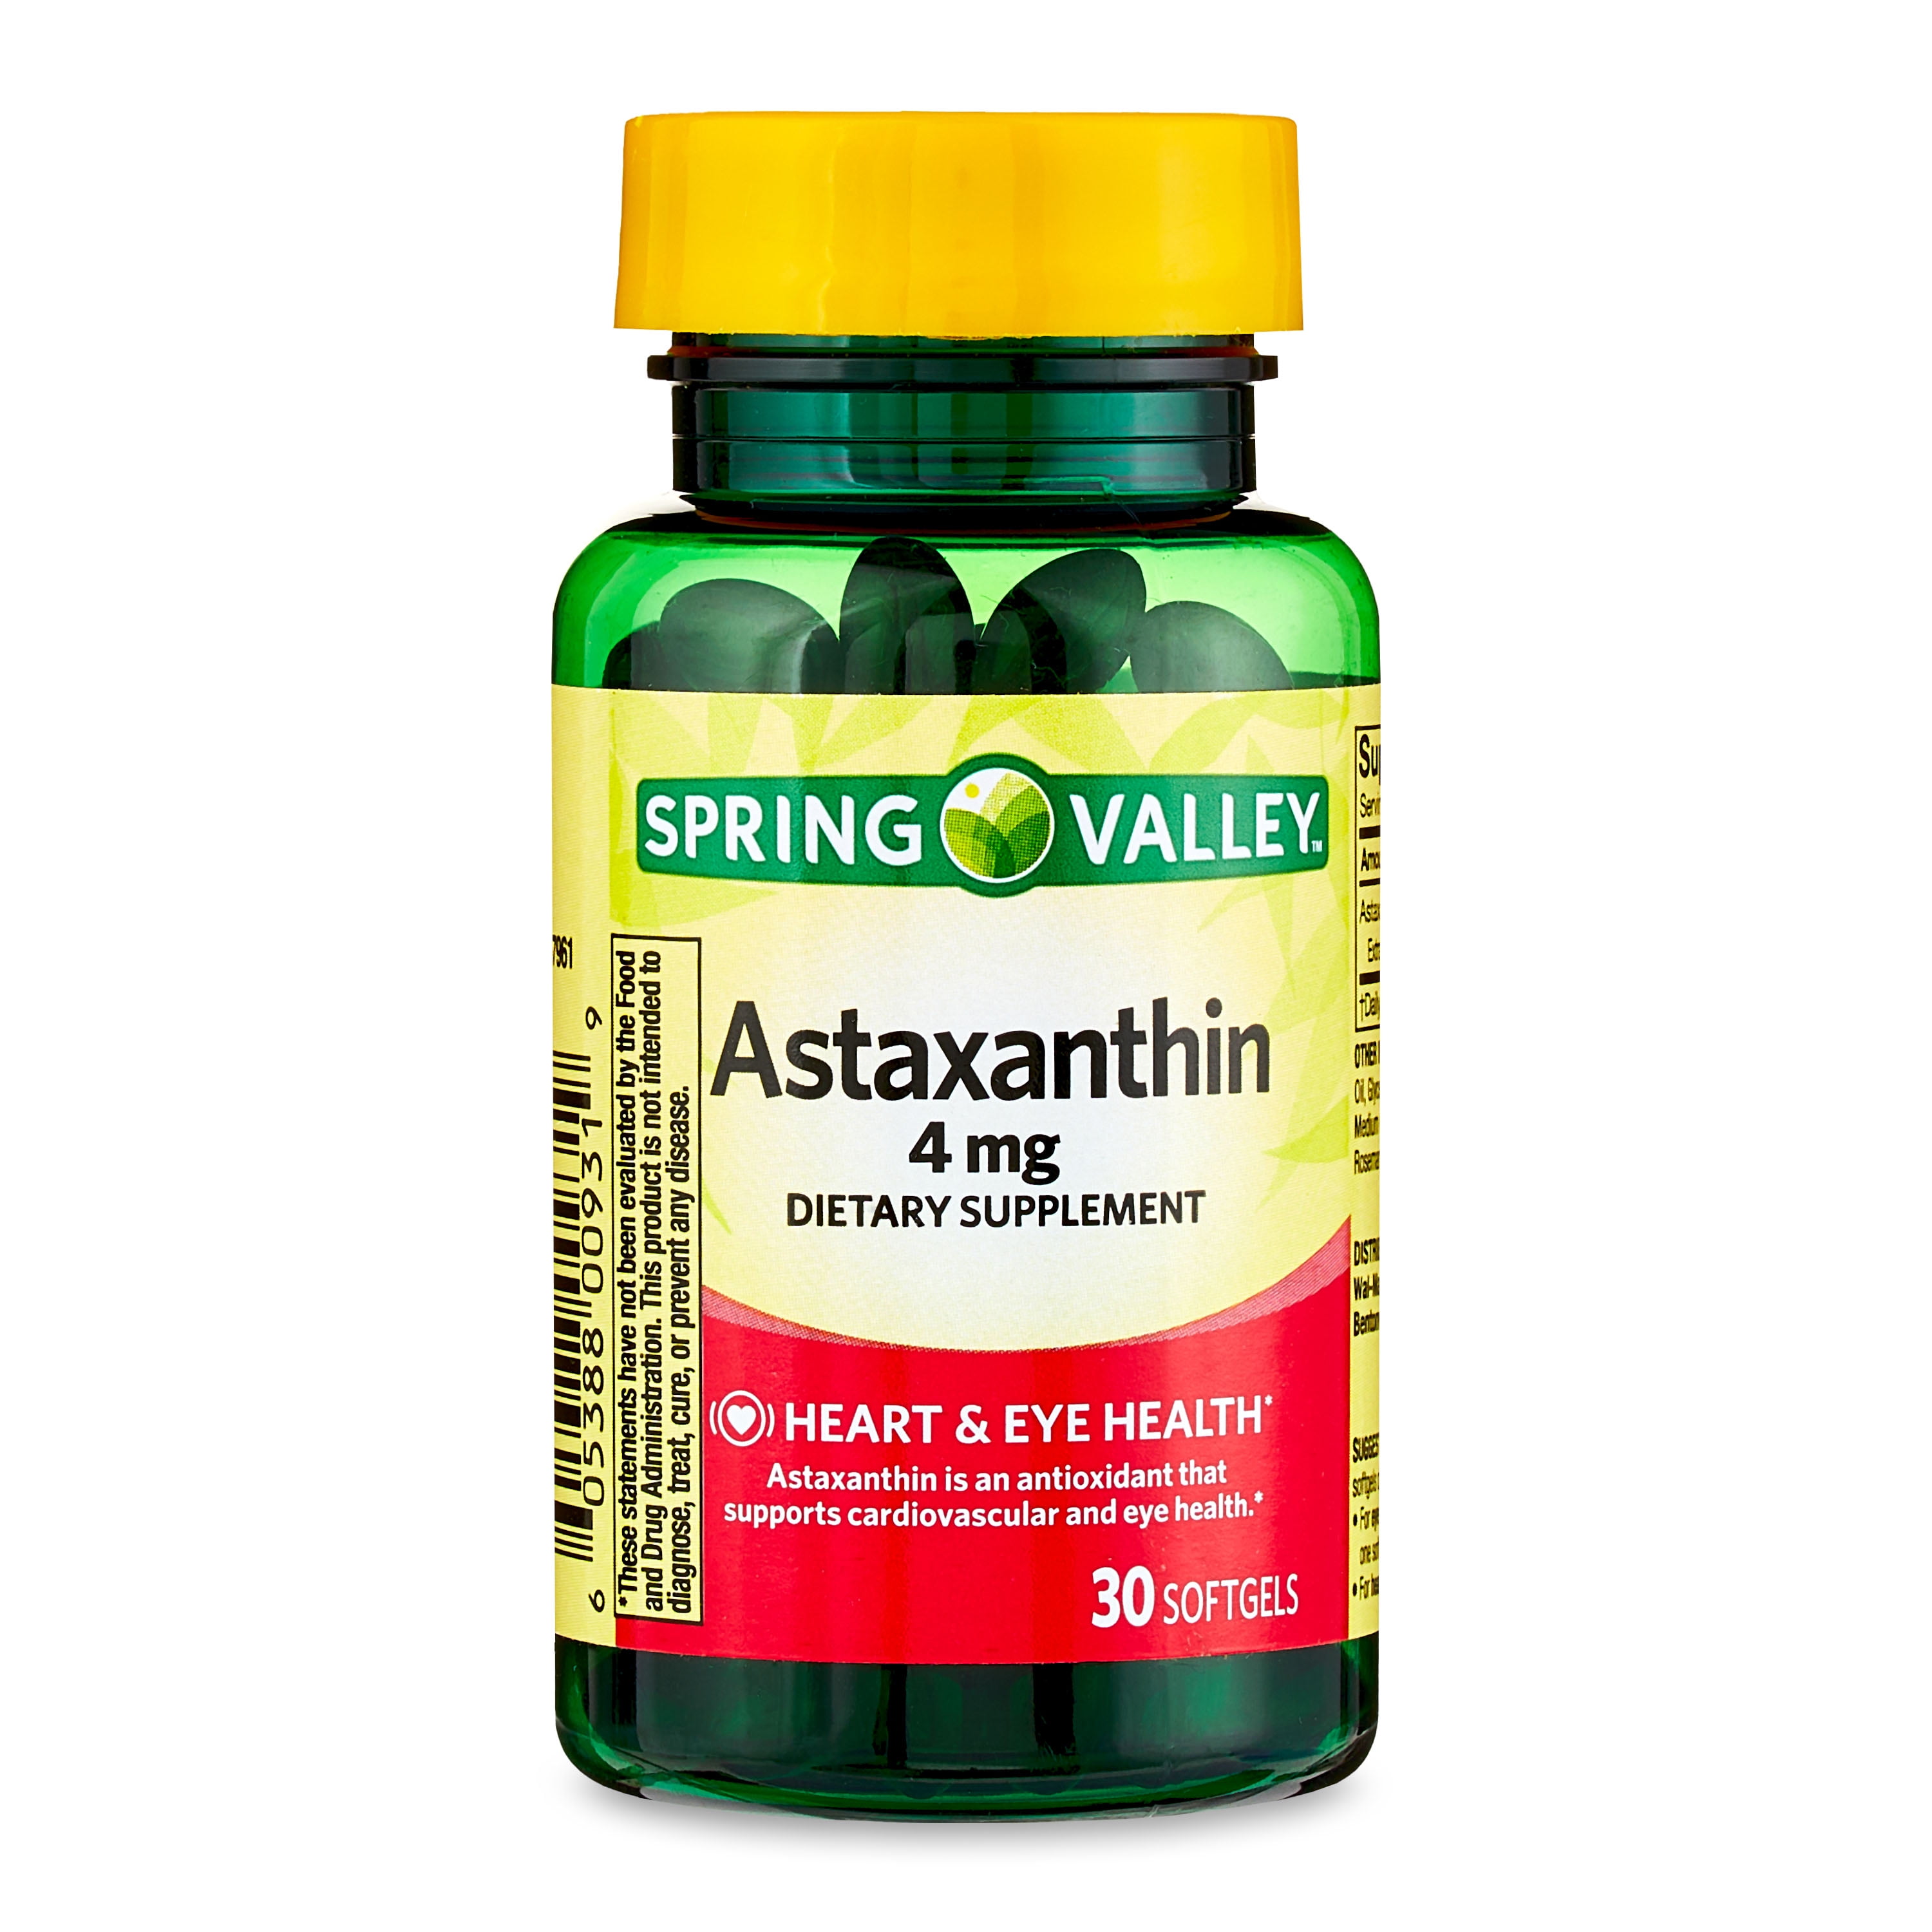 Spring Valley Astaxanthin Dietary Supplement, 4 mg, 30 count